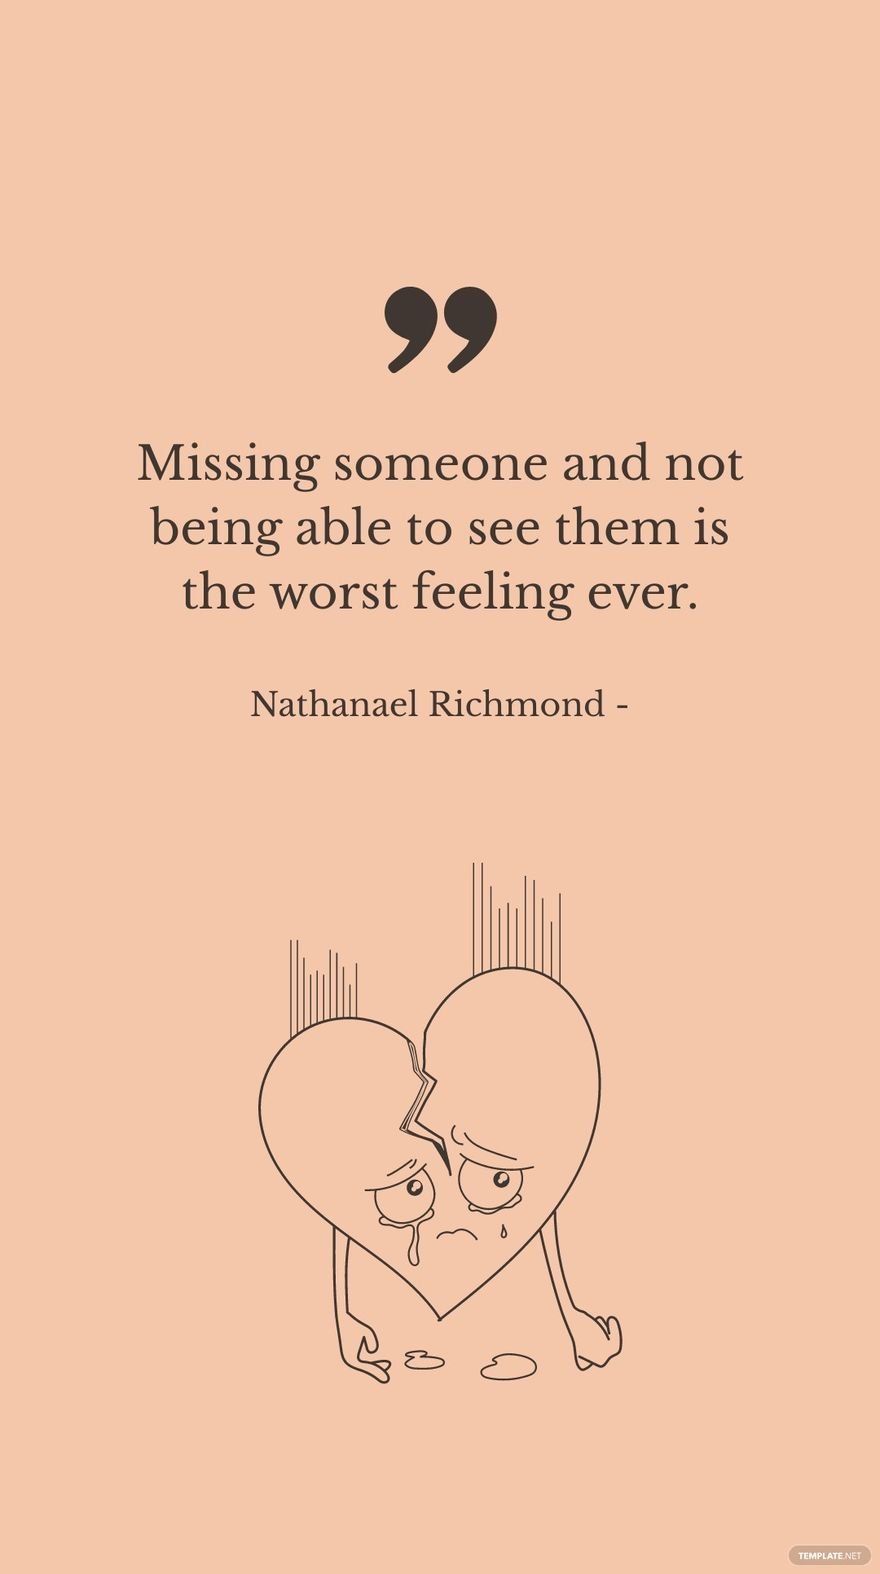 Free Nathanael Richmond - Missing someone and not being able to see them is the worst feeling ever.